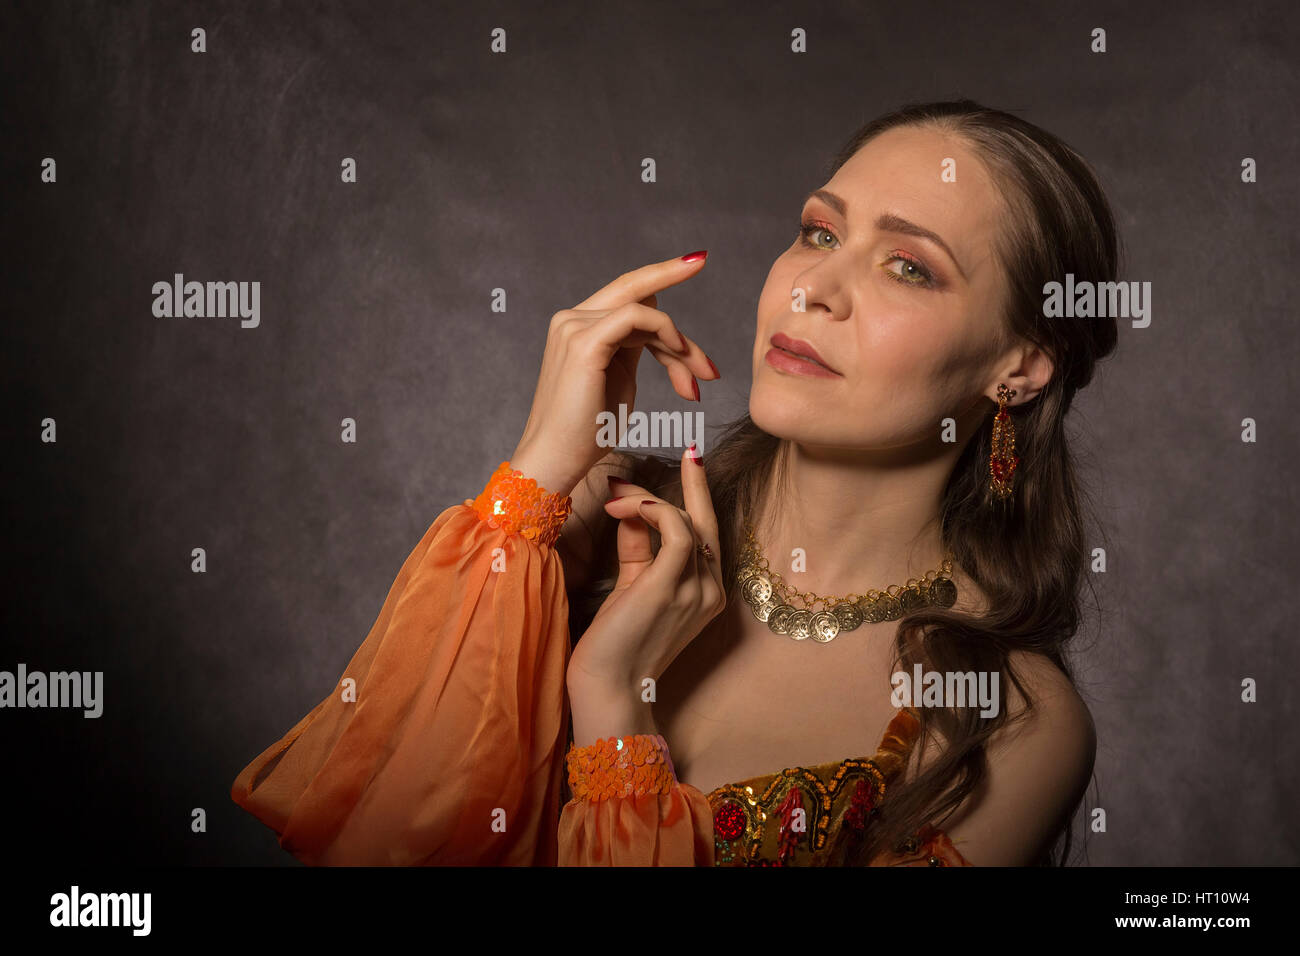 Oriental Beauty in traditional attire. Stock Photo